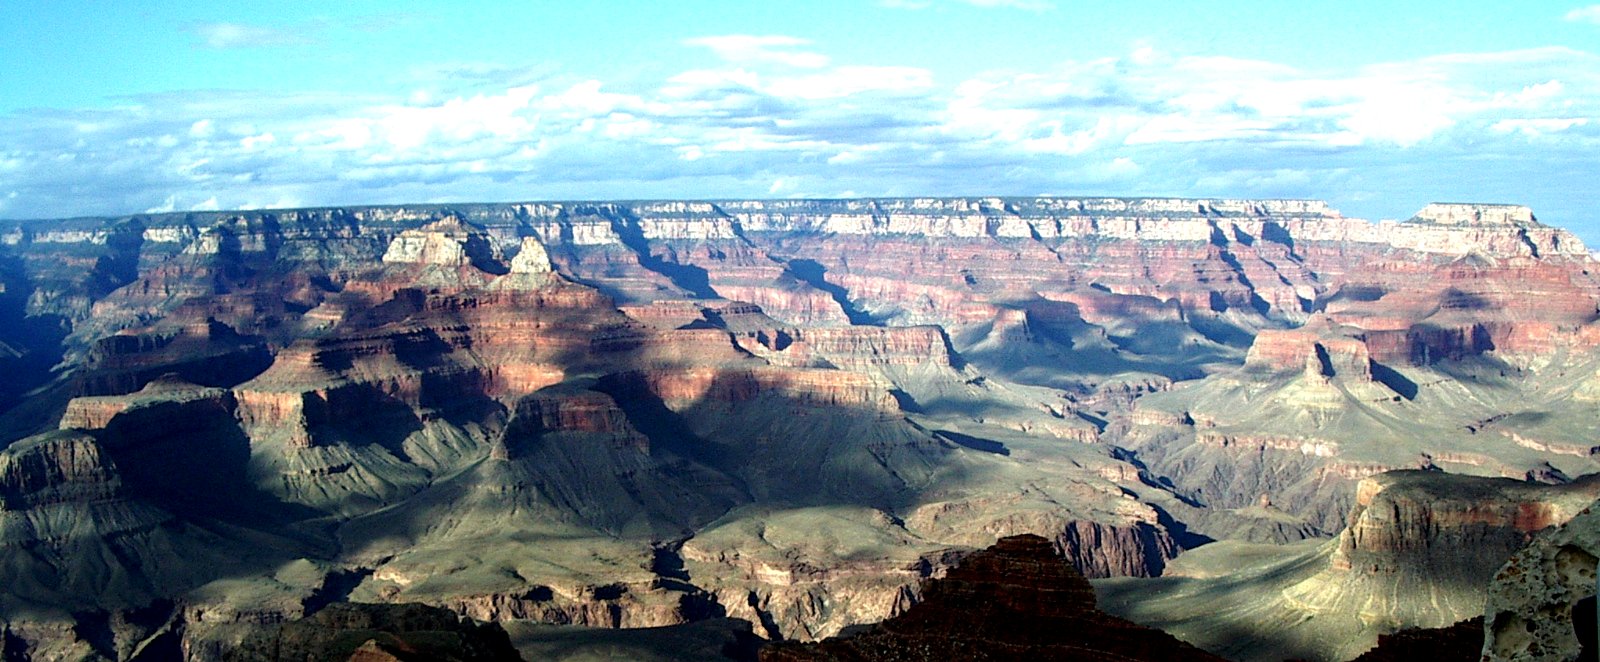 Figure 7.0.1: Arizona’s Grand Canyon is an icon for geological time; 1,450 million years are represented by this photo. The light-coloured layered rocks at the top formed at around 250 Ma, and the dark rocks at the bottom (within the steep canyon) at around 1,700 Ma.